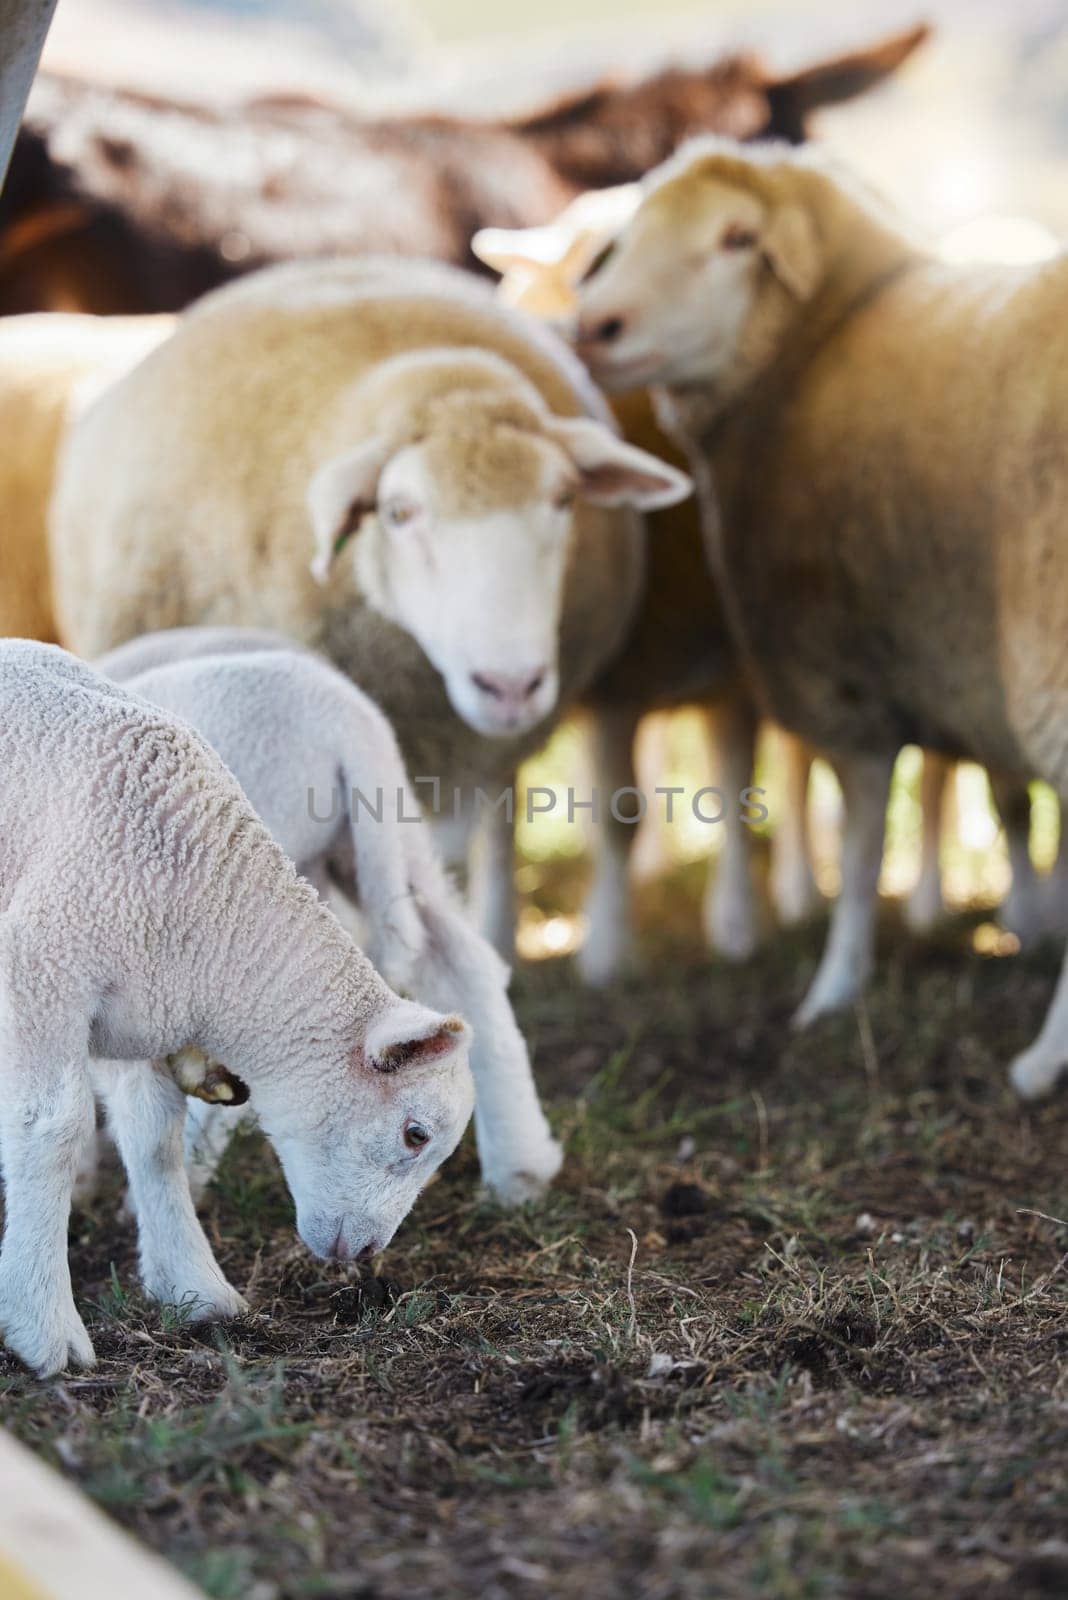 Sheep, farm animals and no people on a countryside field for agriculture business on grass. Sustainability, ecology and livestock production of animal group in nature on the ground soil for farming.